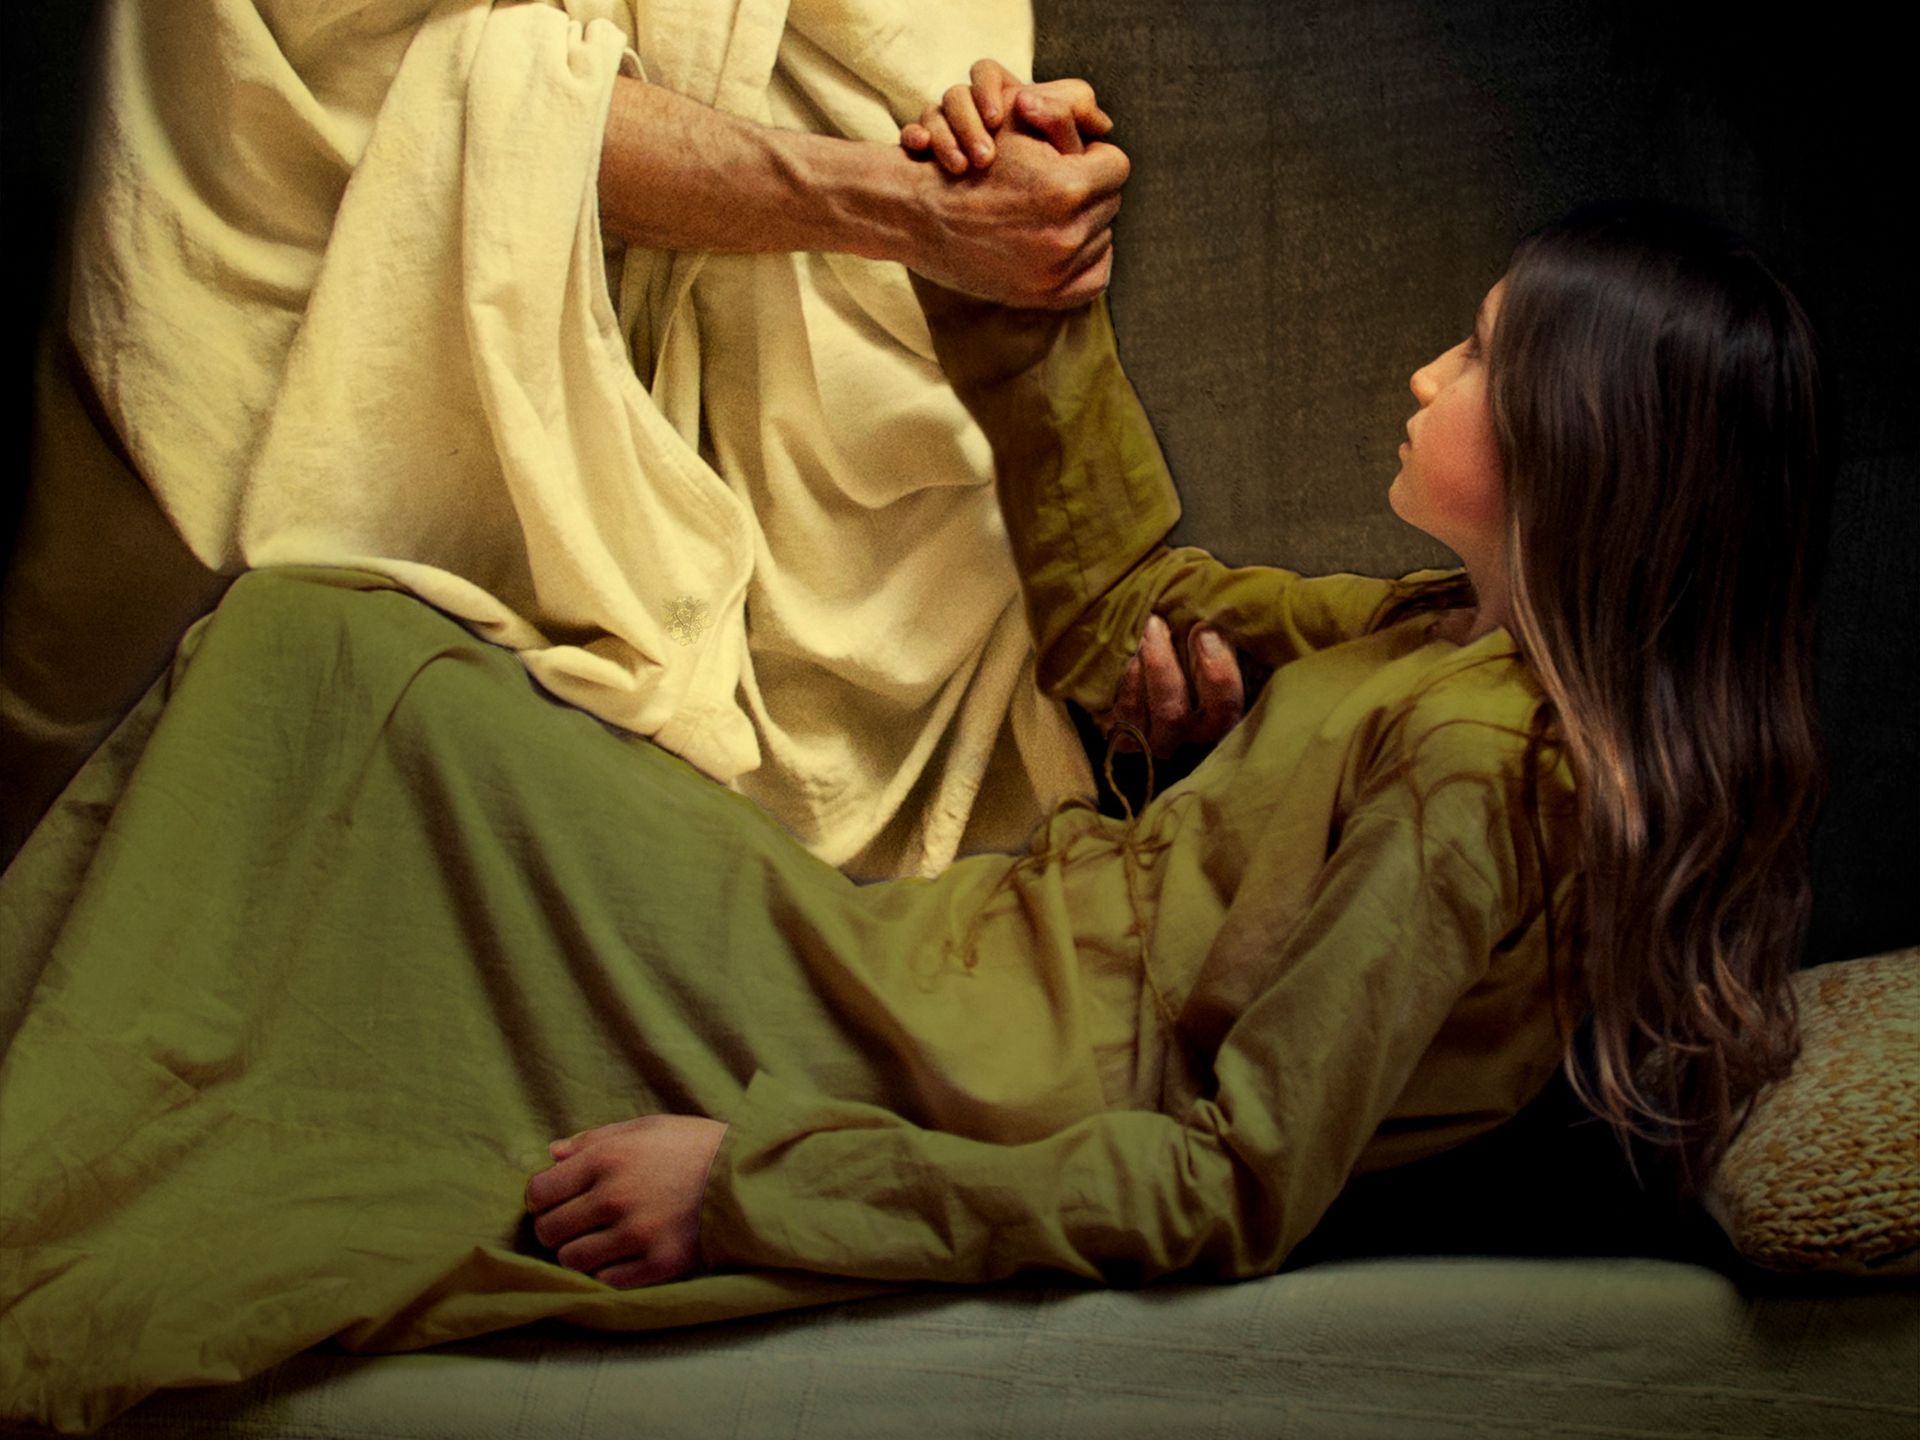 Photographic illustration of Jesus Christ healing the daughter of Jairus.   The image shows the figure (not the face) of Christ as he takes the young girl by the hand and assists her to rise from her sick bed. © undefined ipCode 1.